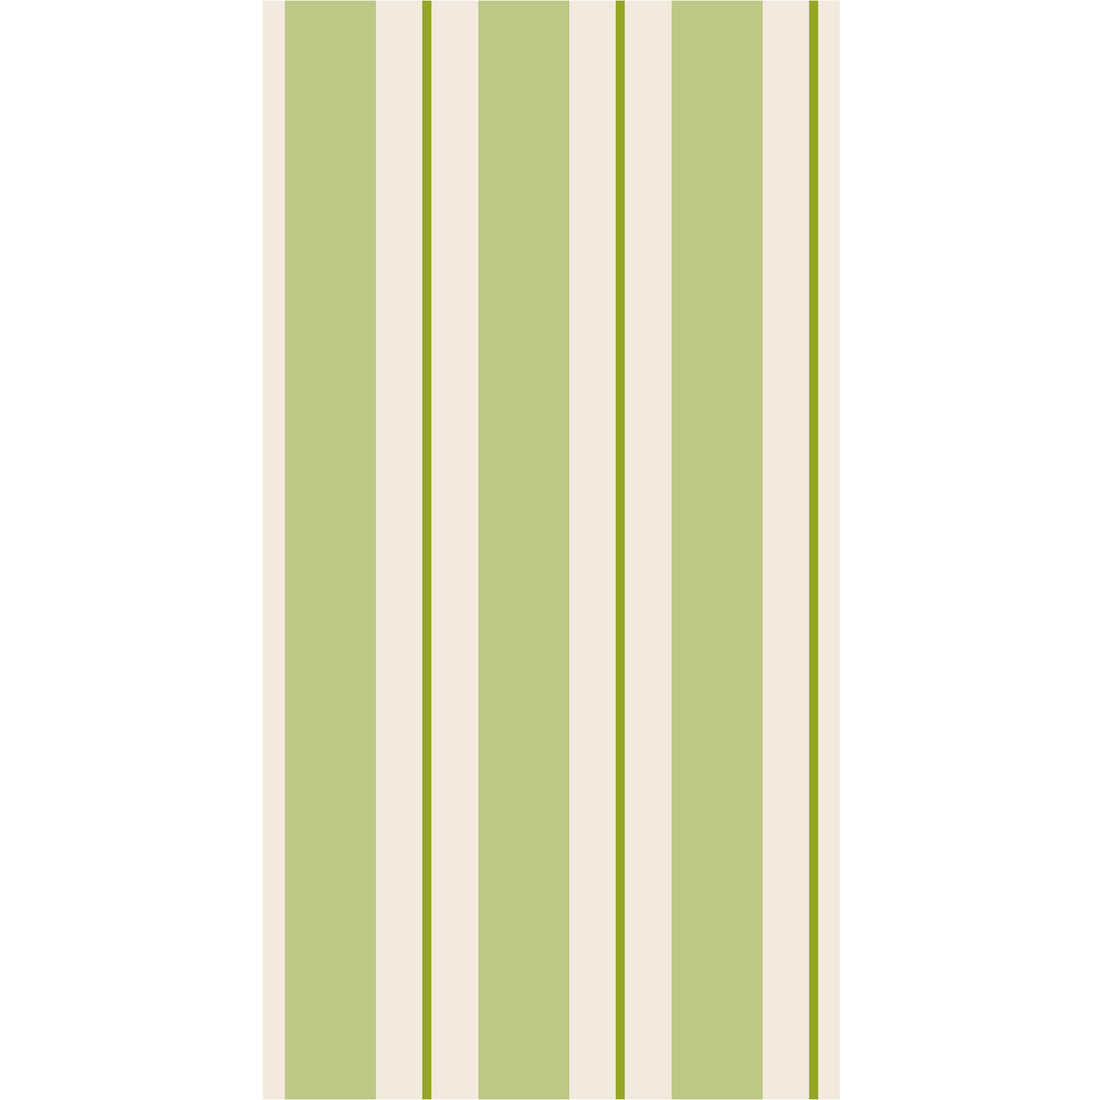 A rectangle guest napkin featuring vertical light green and white stripes, with a bright green line centered in each white stripe.